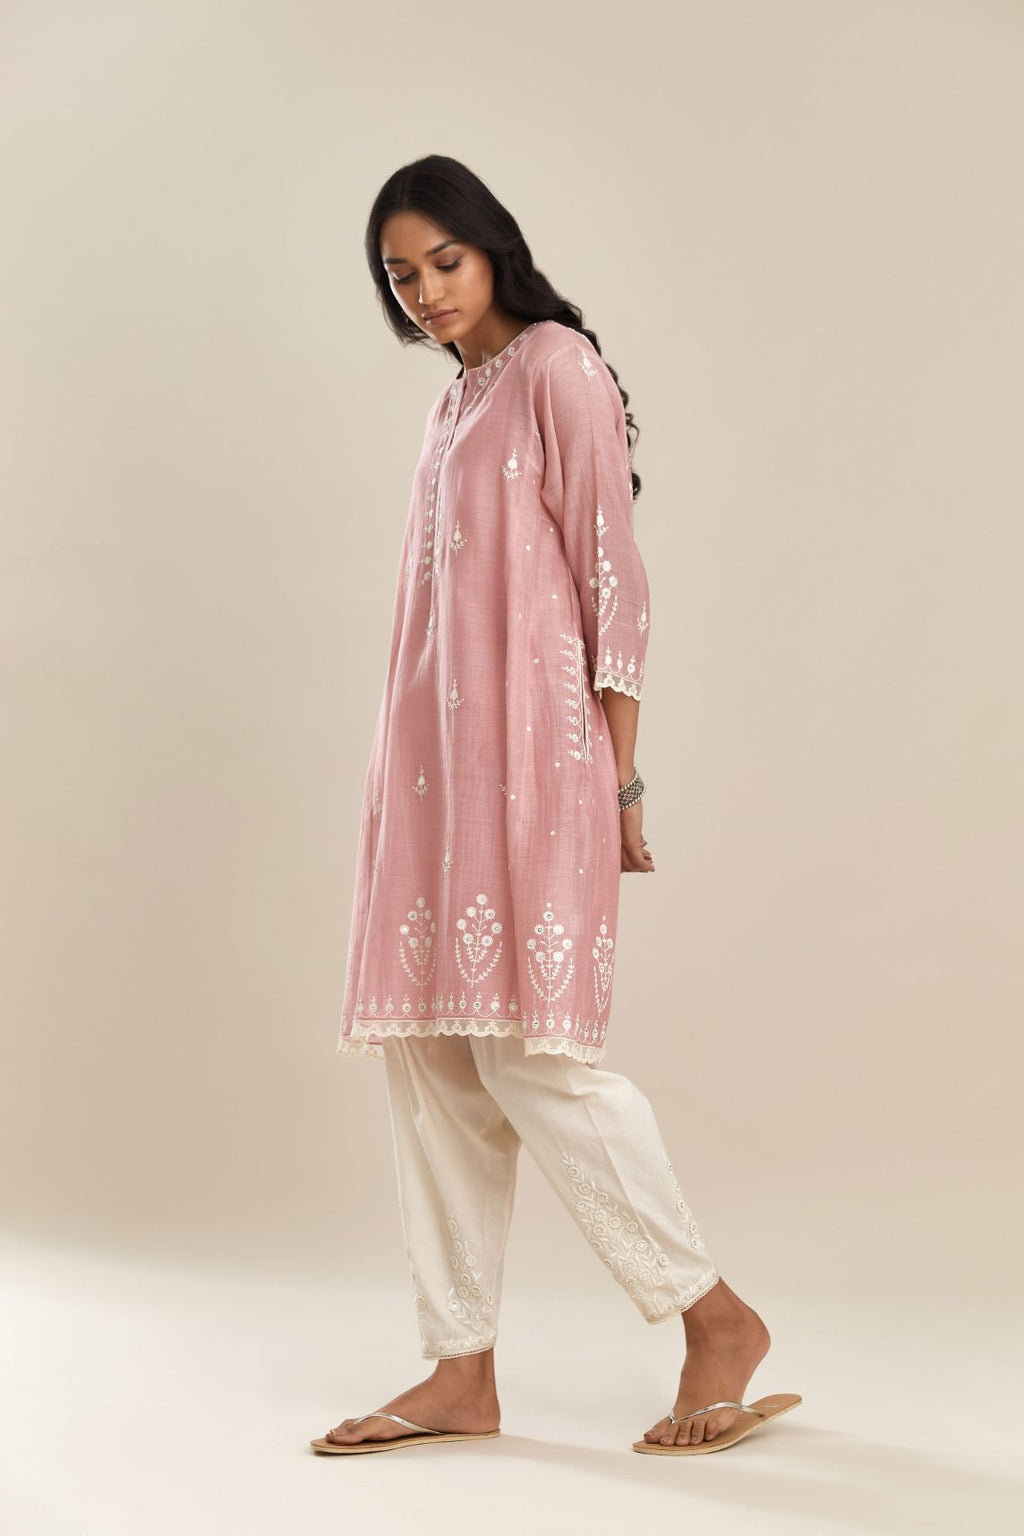 Pink cotton chanderi short kalidar kurta set, with off white silk thread embroidery, highlighted with hand attached sequin and beads.